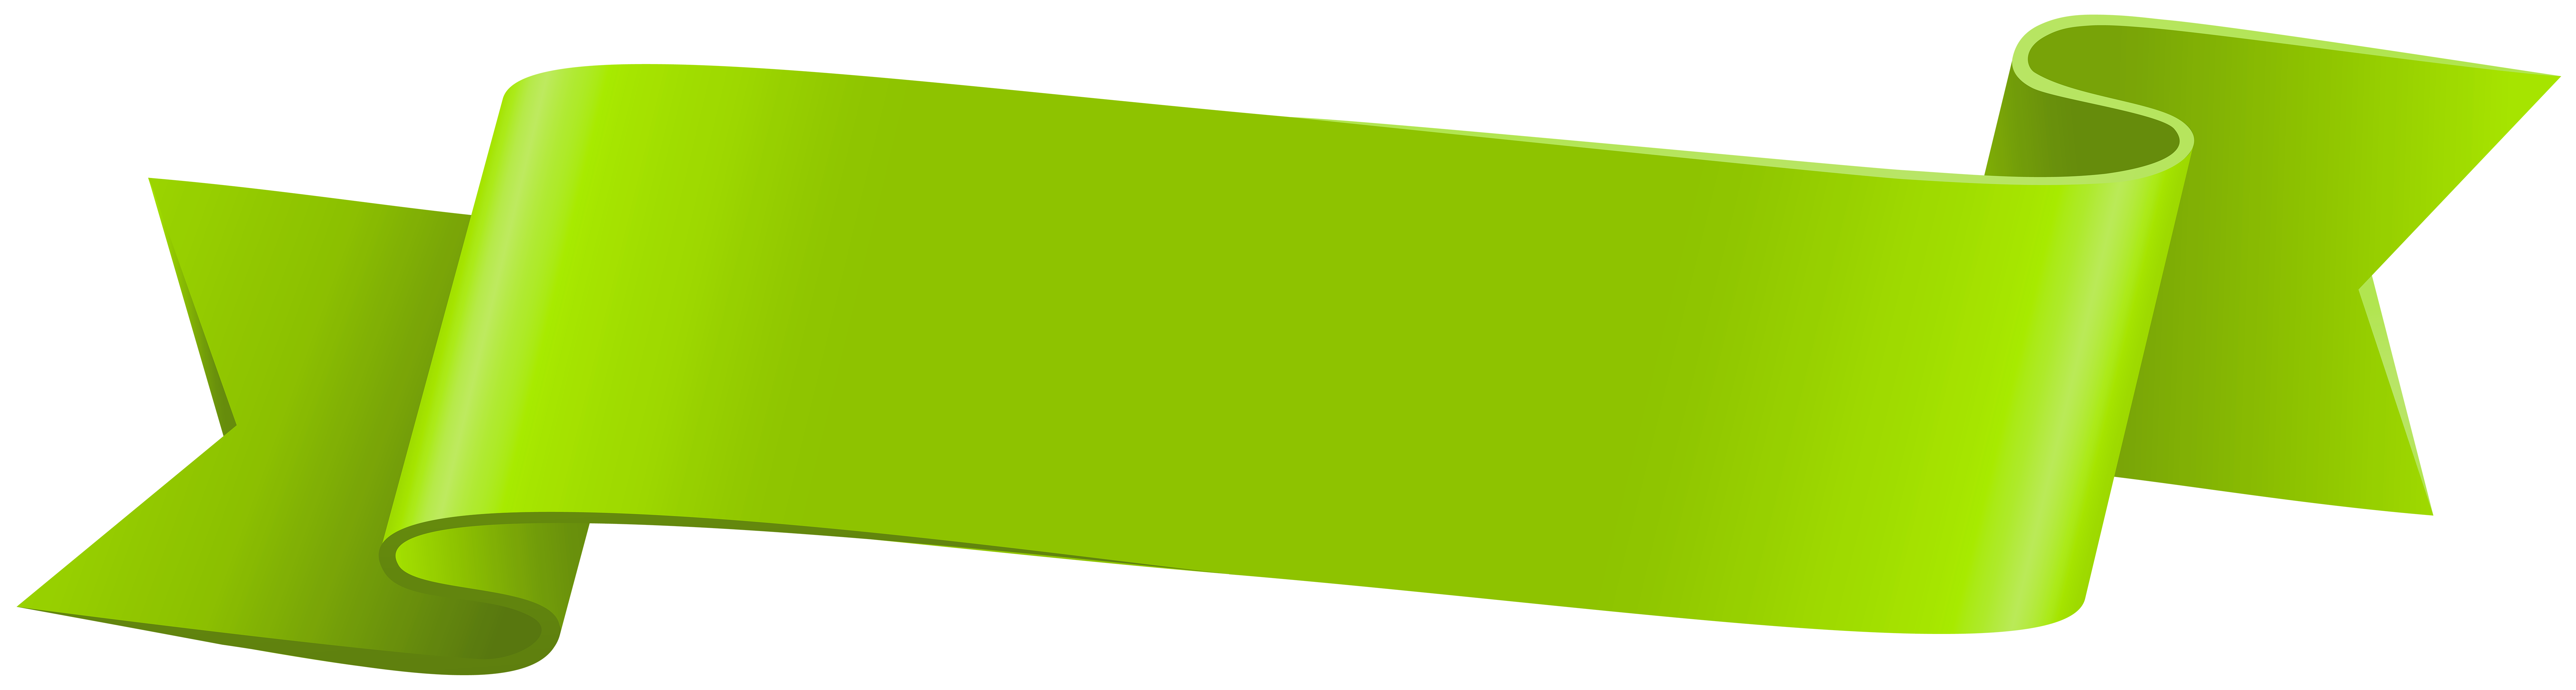 Green_Business_Banner_PNG_Clipart.png